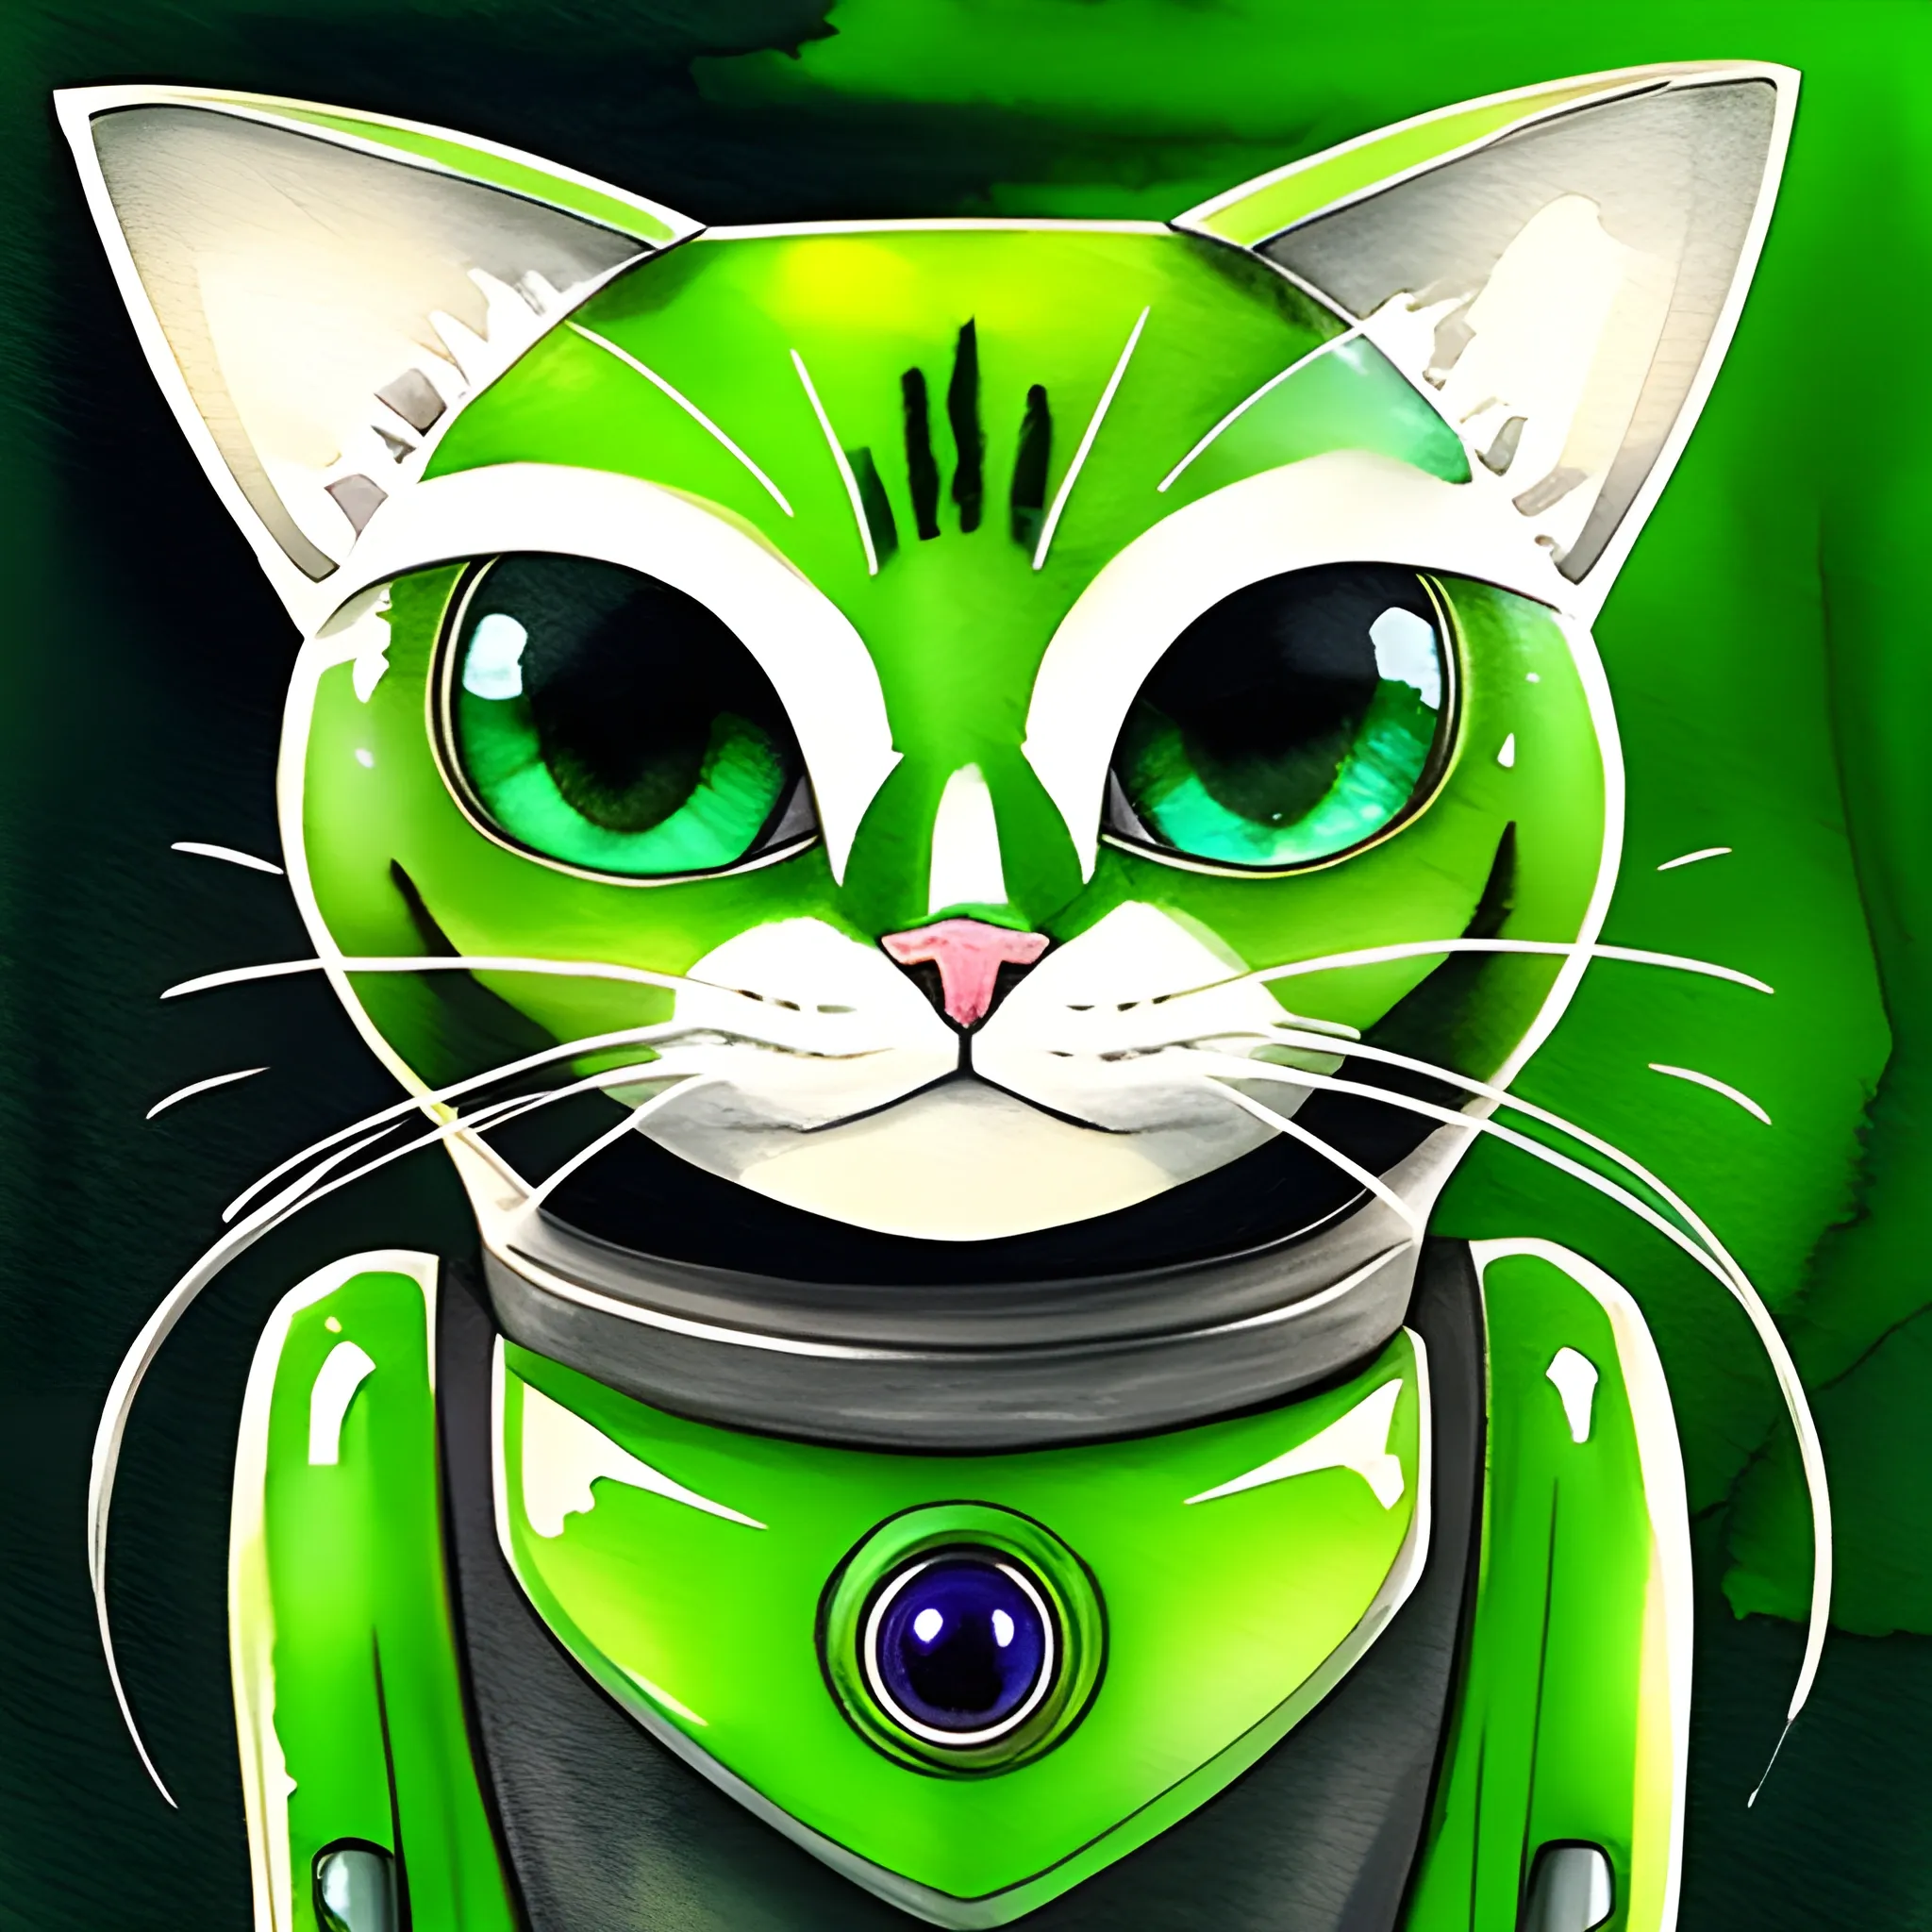 Adorable Green Cat robot with little eyes smile 
, Water Color